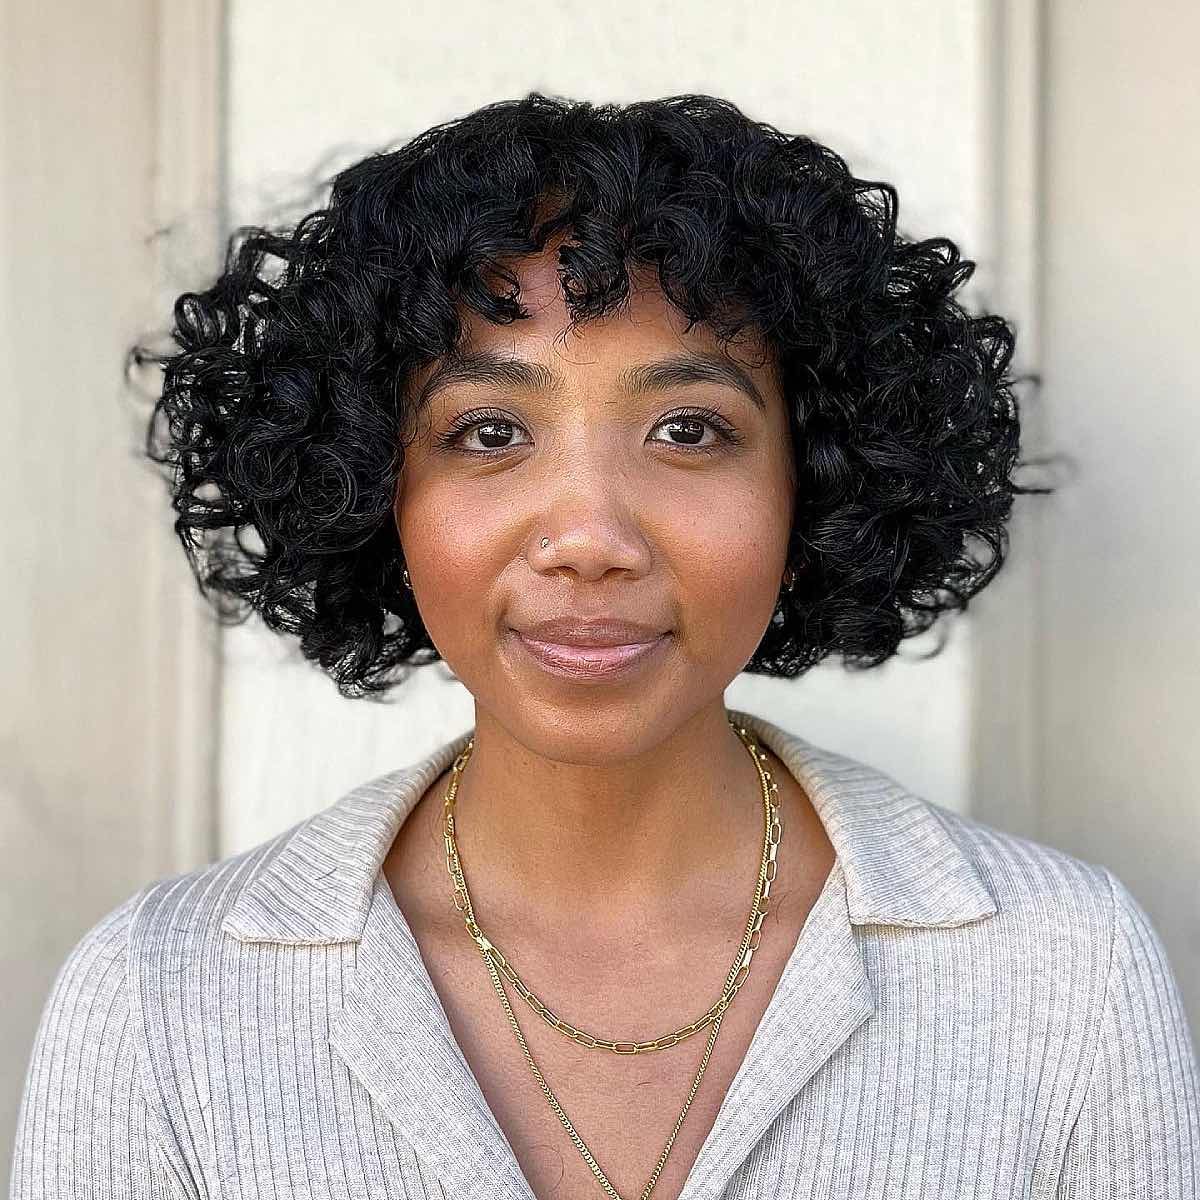 41 Best Short Curly Hair with Bangs to Try This Year